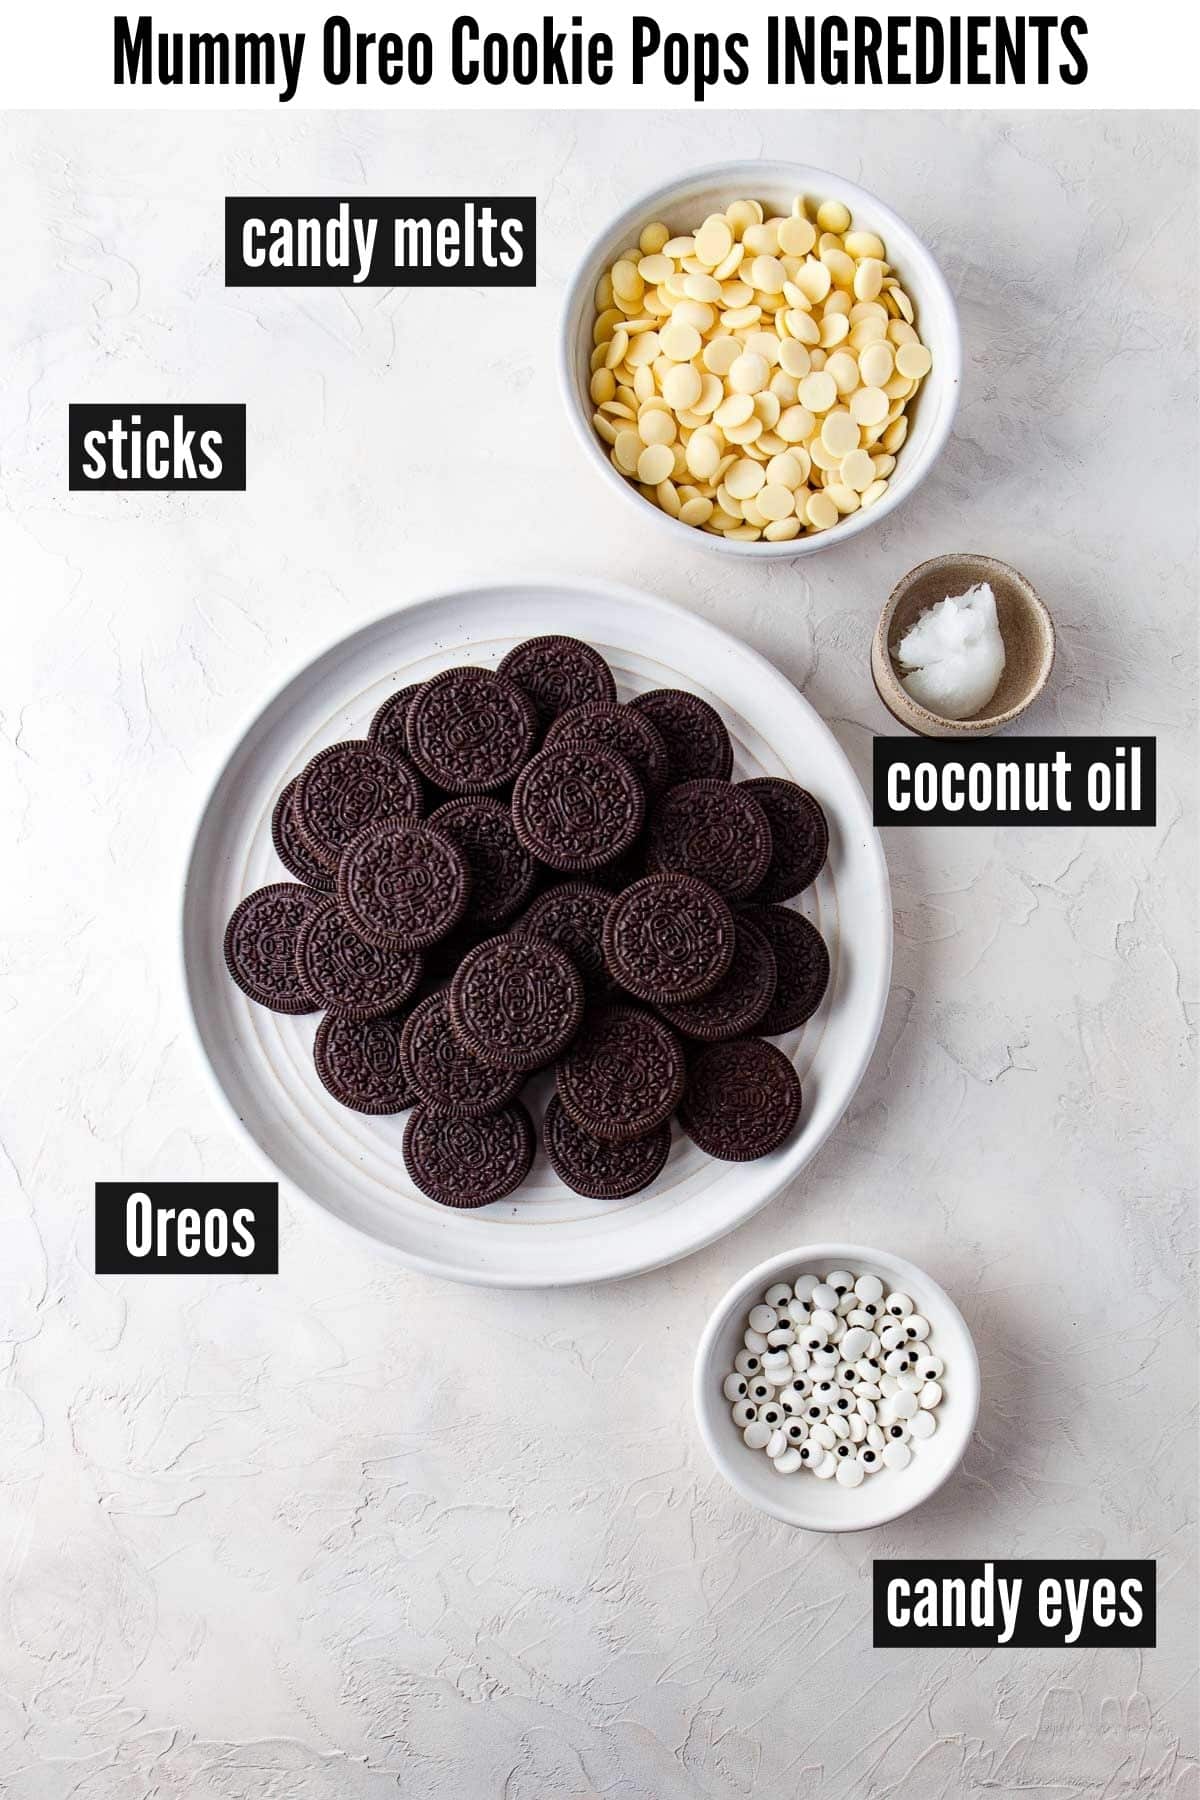 mummy oreo cookie pops ingredients labelled